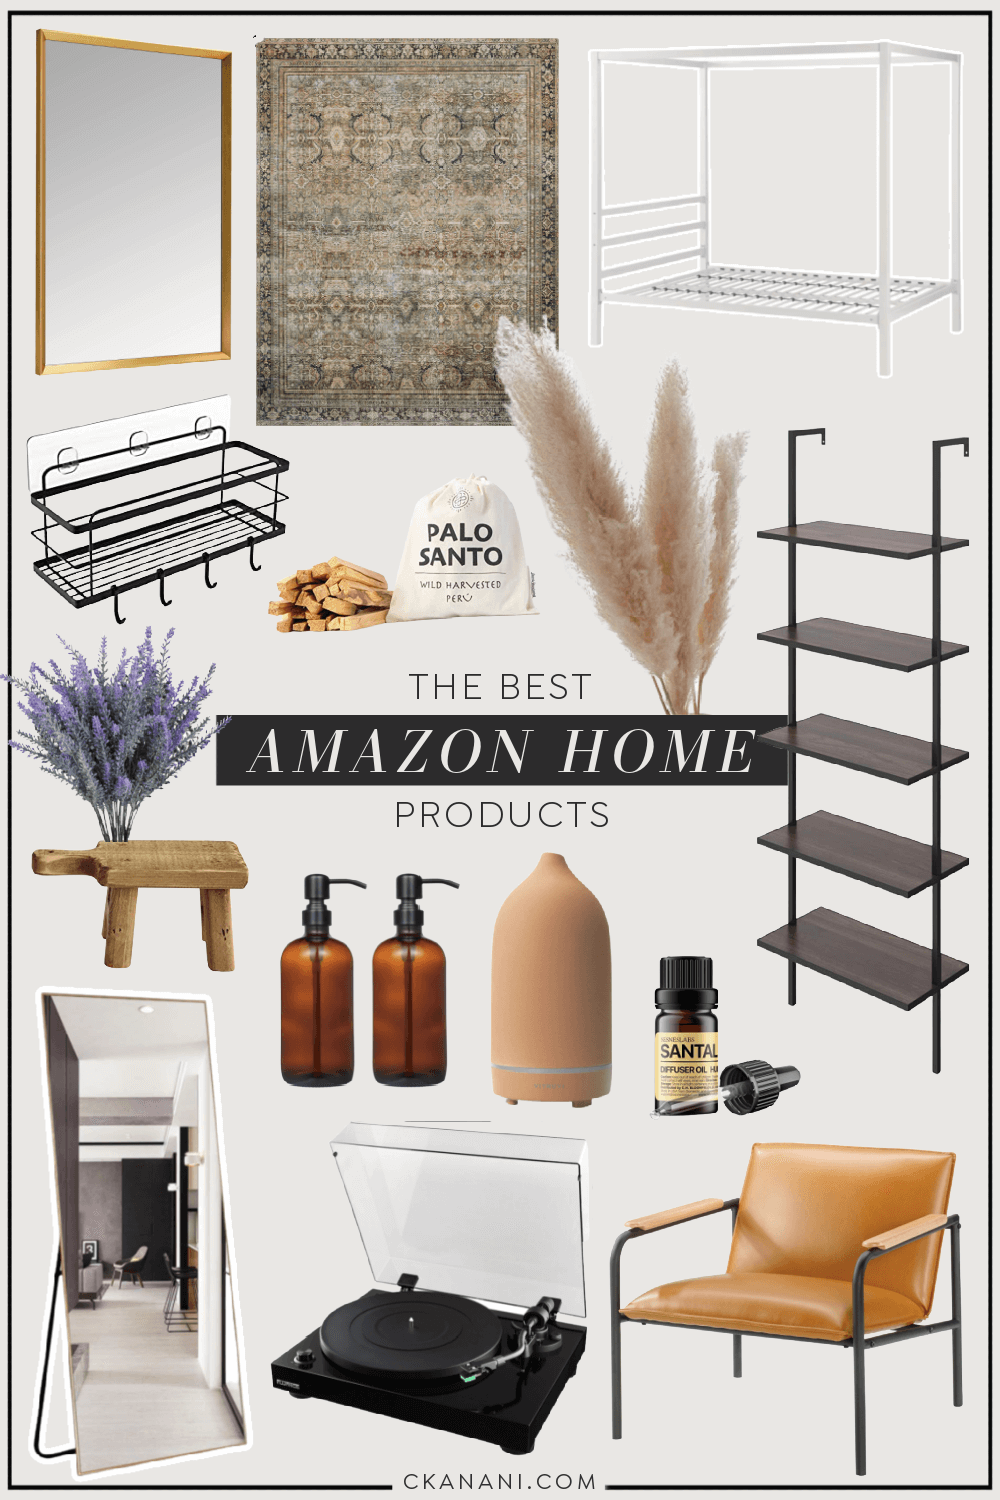 The Best Amazon Home Products